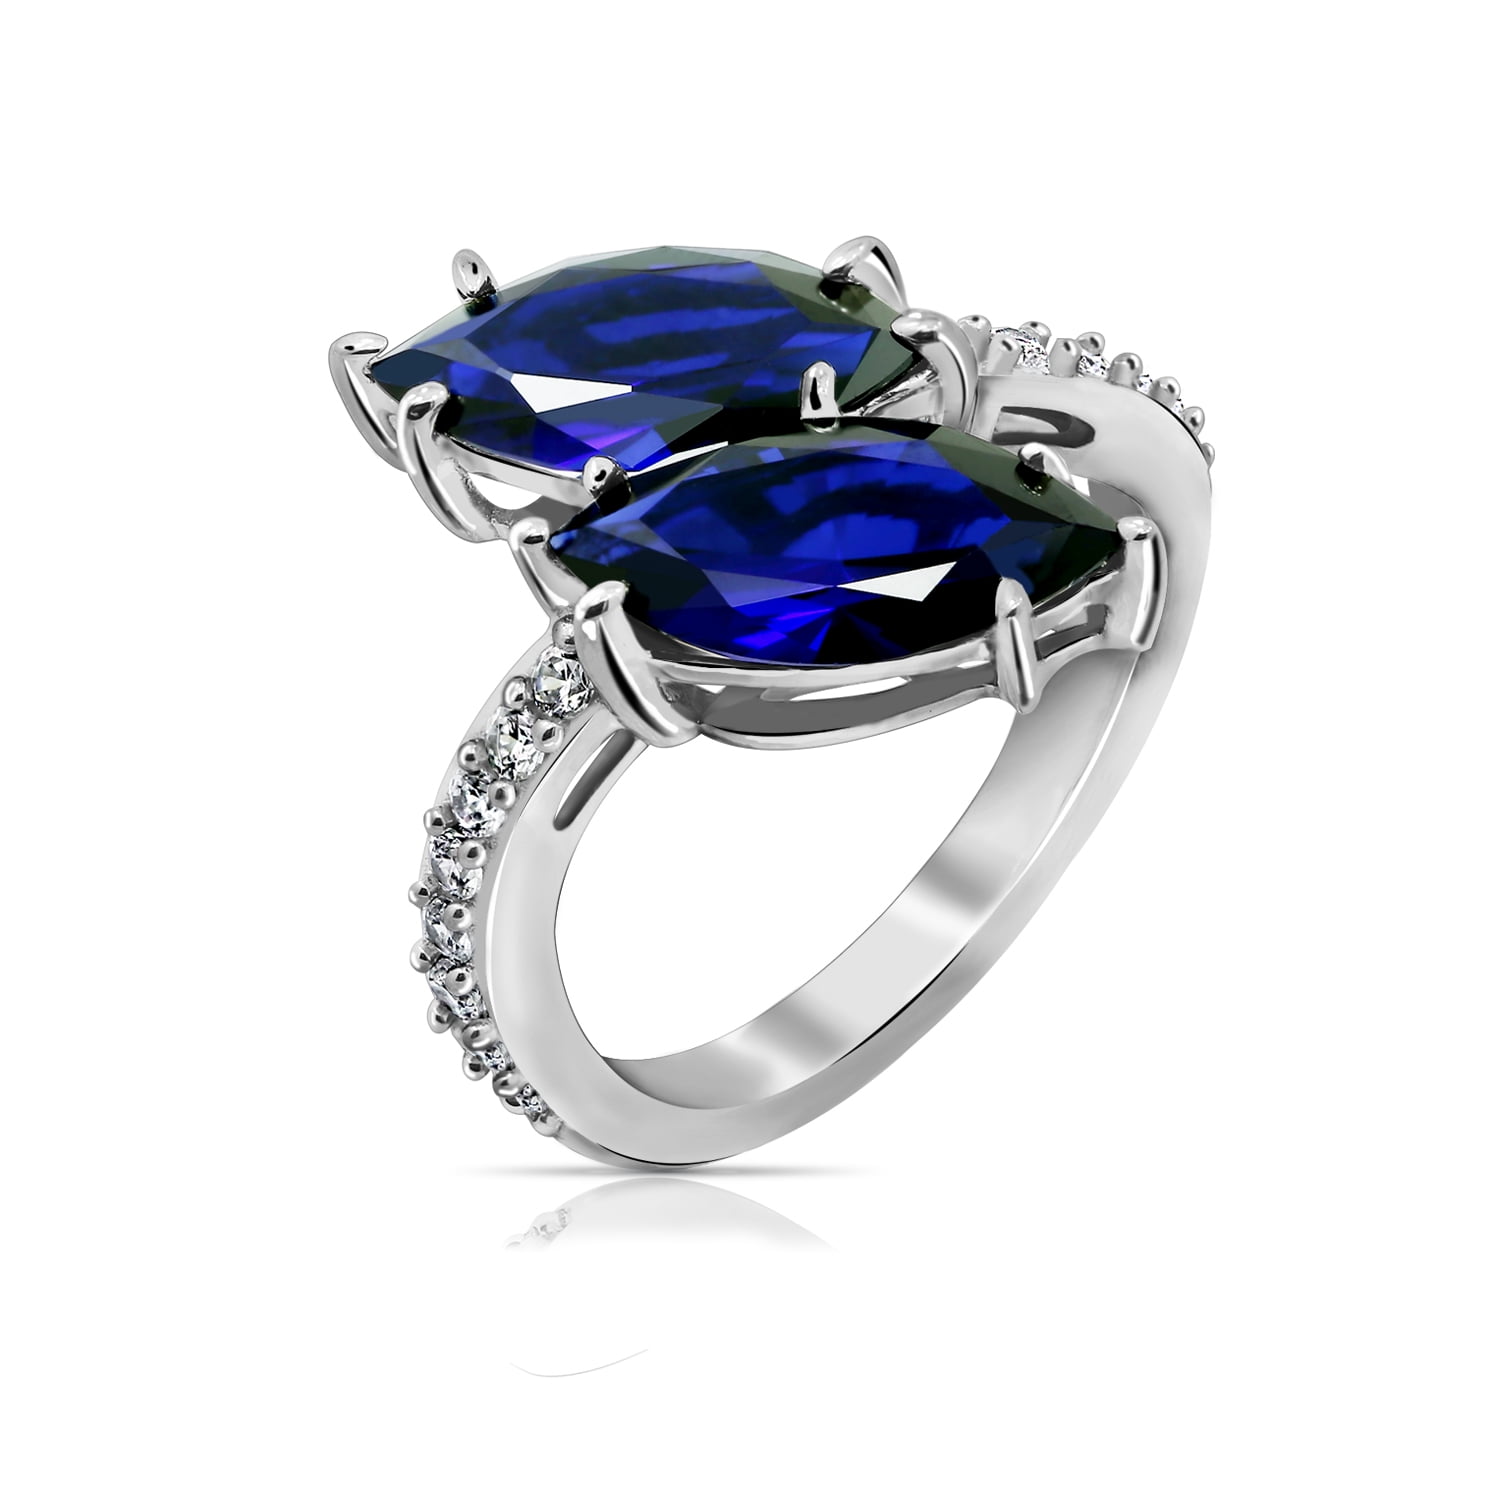 Details about   Silver Plated Flower Blue And White Cubic Zirconia Ring Various Sizes 